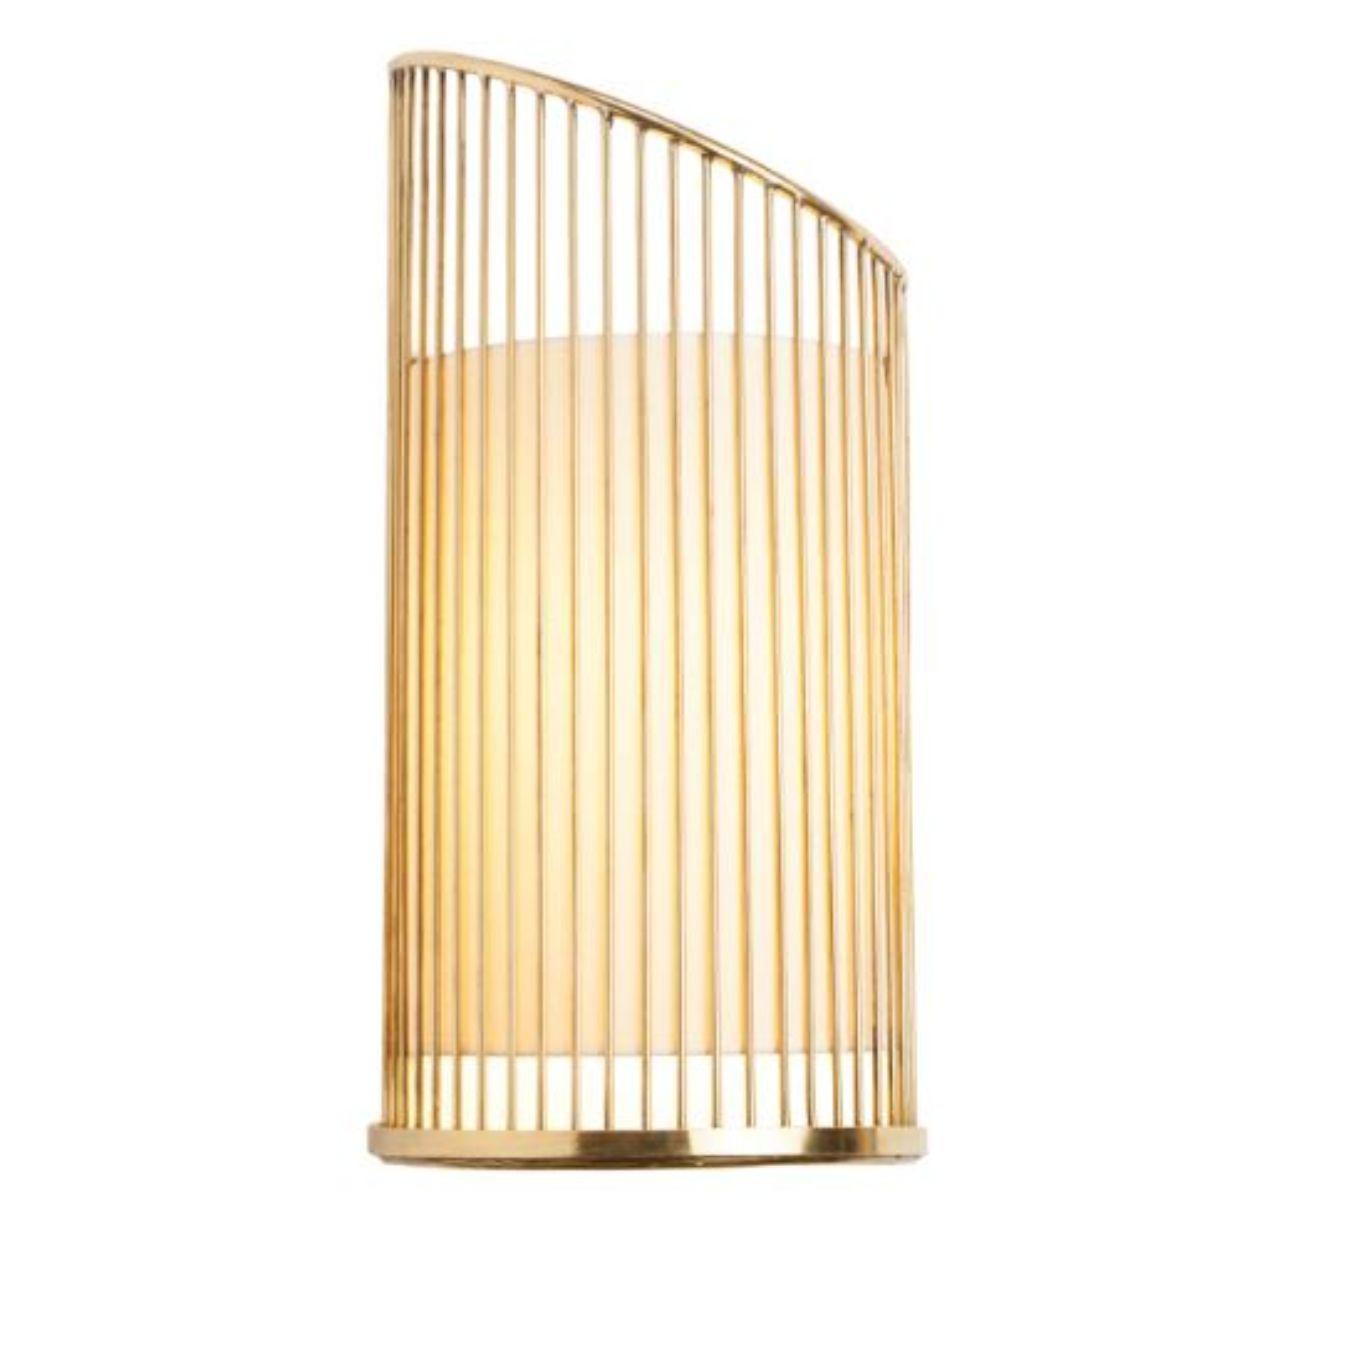 Brass new spider wall lamp with brass ring by Dooq.
Dimensions: W 25x D 15x H 50cm.
Materials: lacquered metal, polished or brushed metal, brass.
abat-jour: cotton
Also available in different colors and materials. 

Information:
230V/50Hz
E14/1x15W